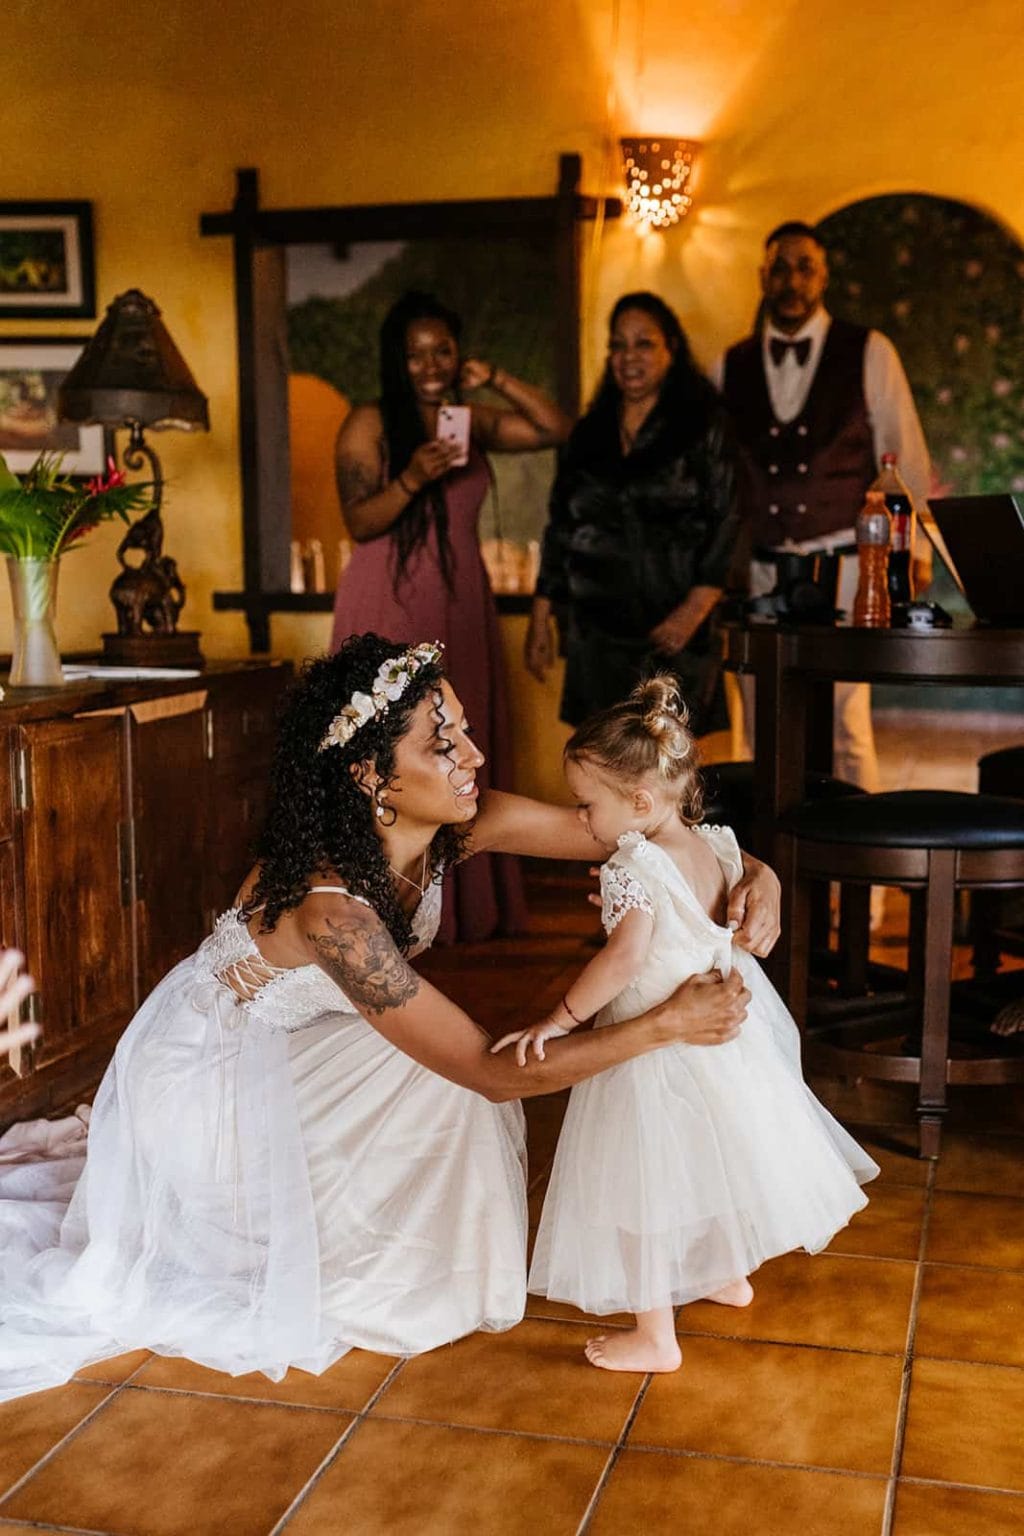 A bride puts a dress on her daughter as they get ready for the wedding.